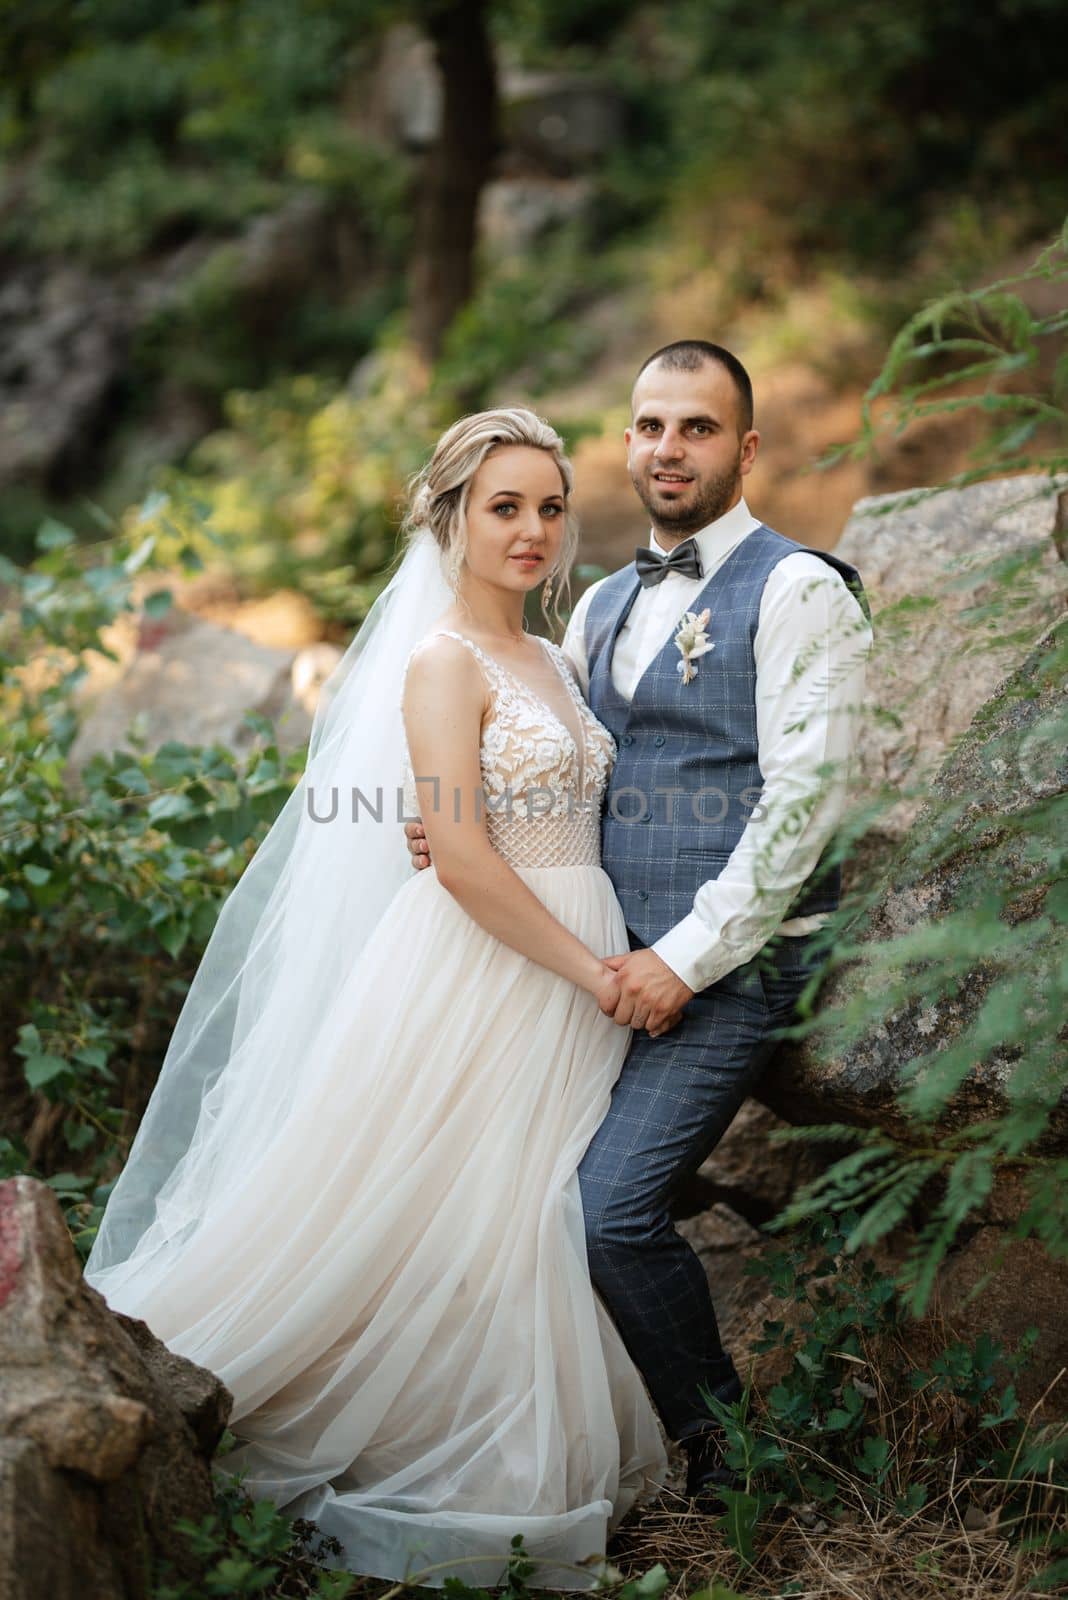 the groom and the bride are walking in the forest by Andreua